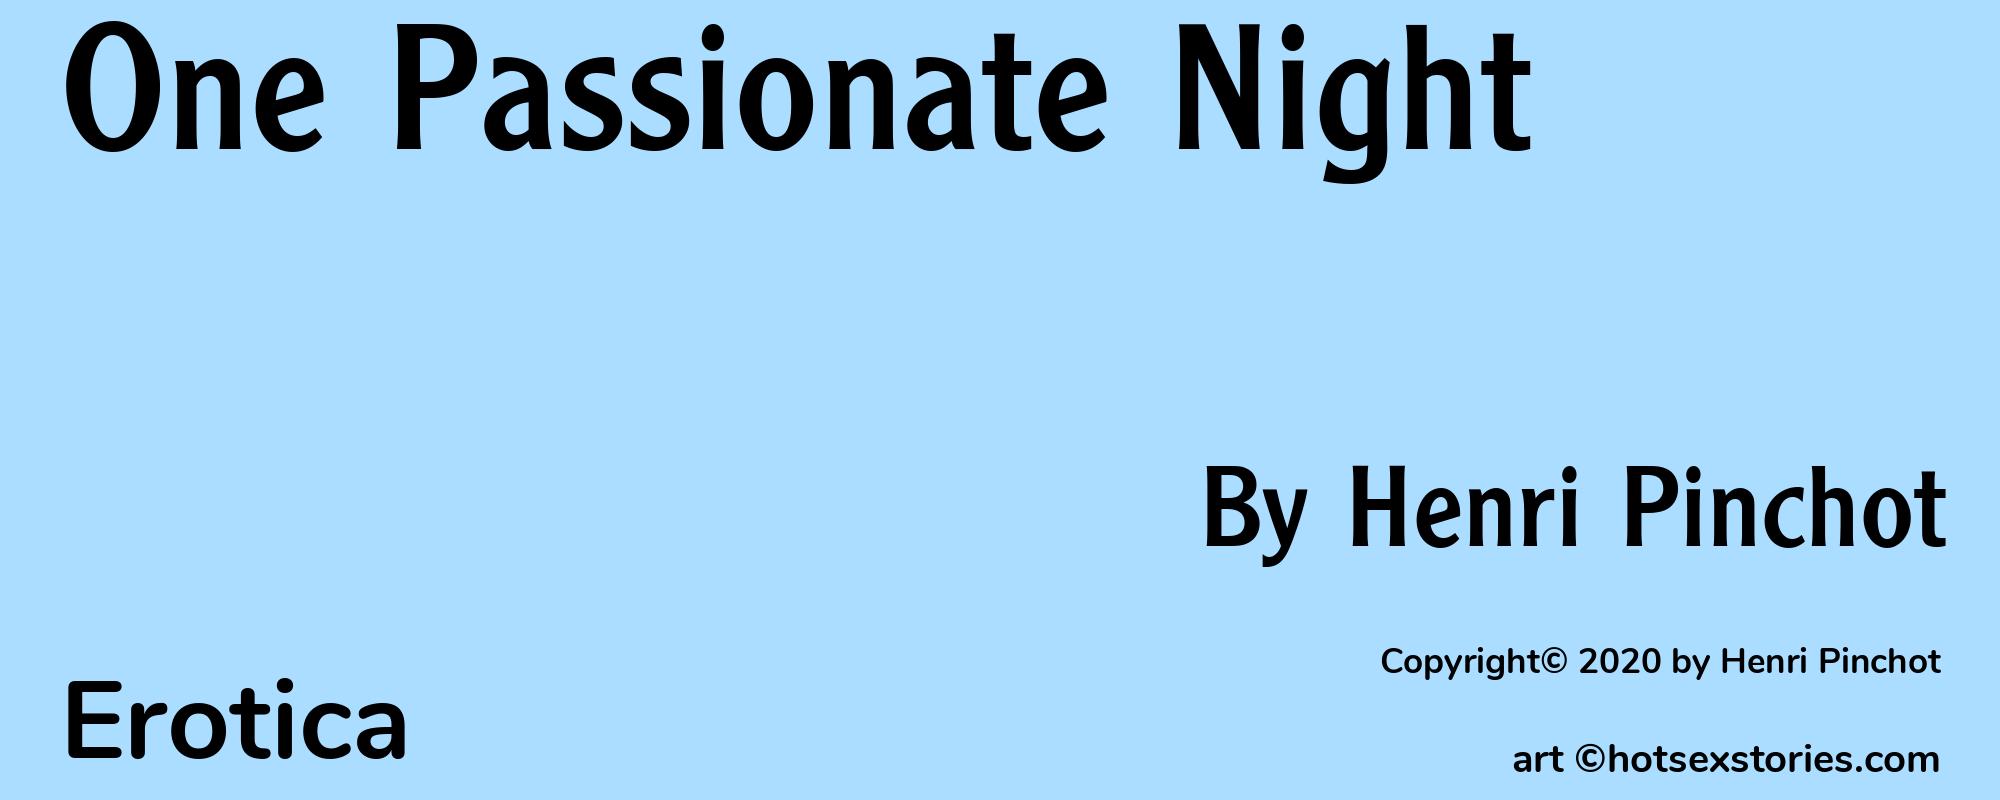 One Passionate Night - Cover